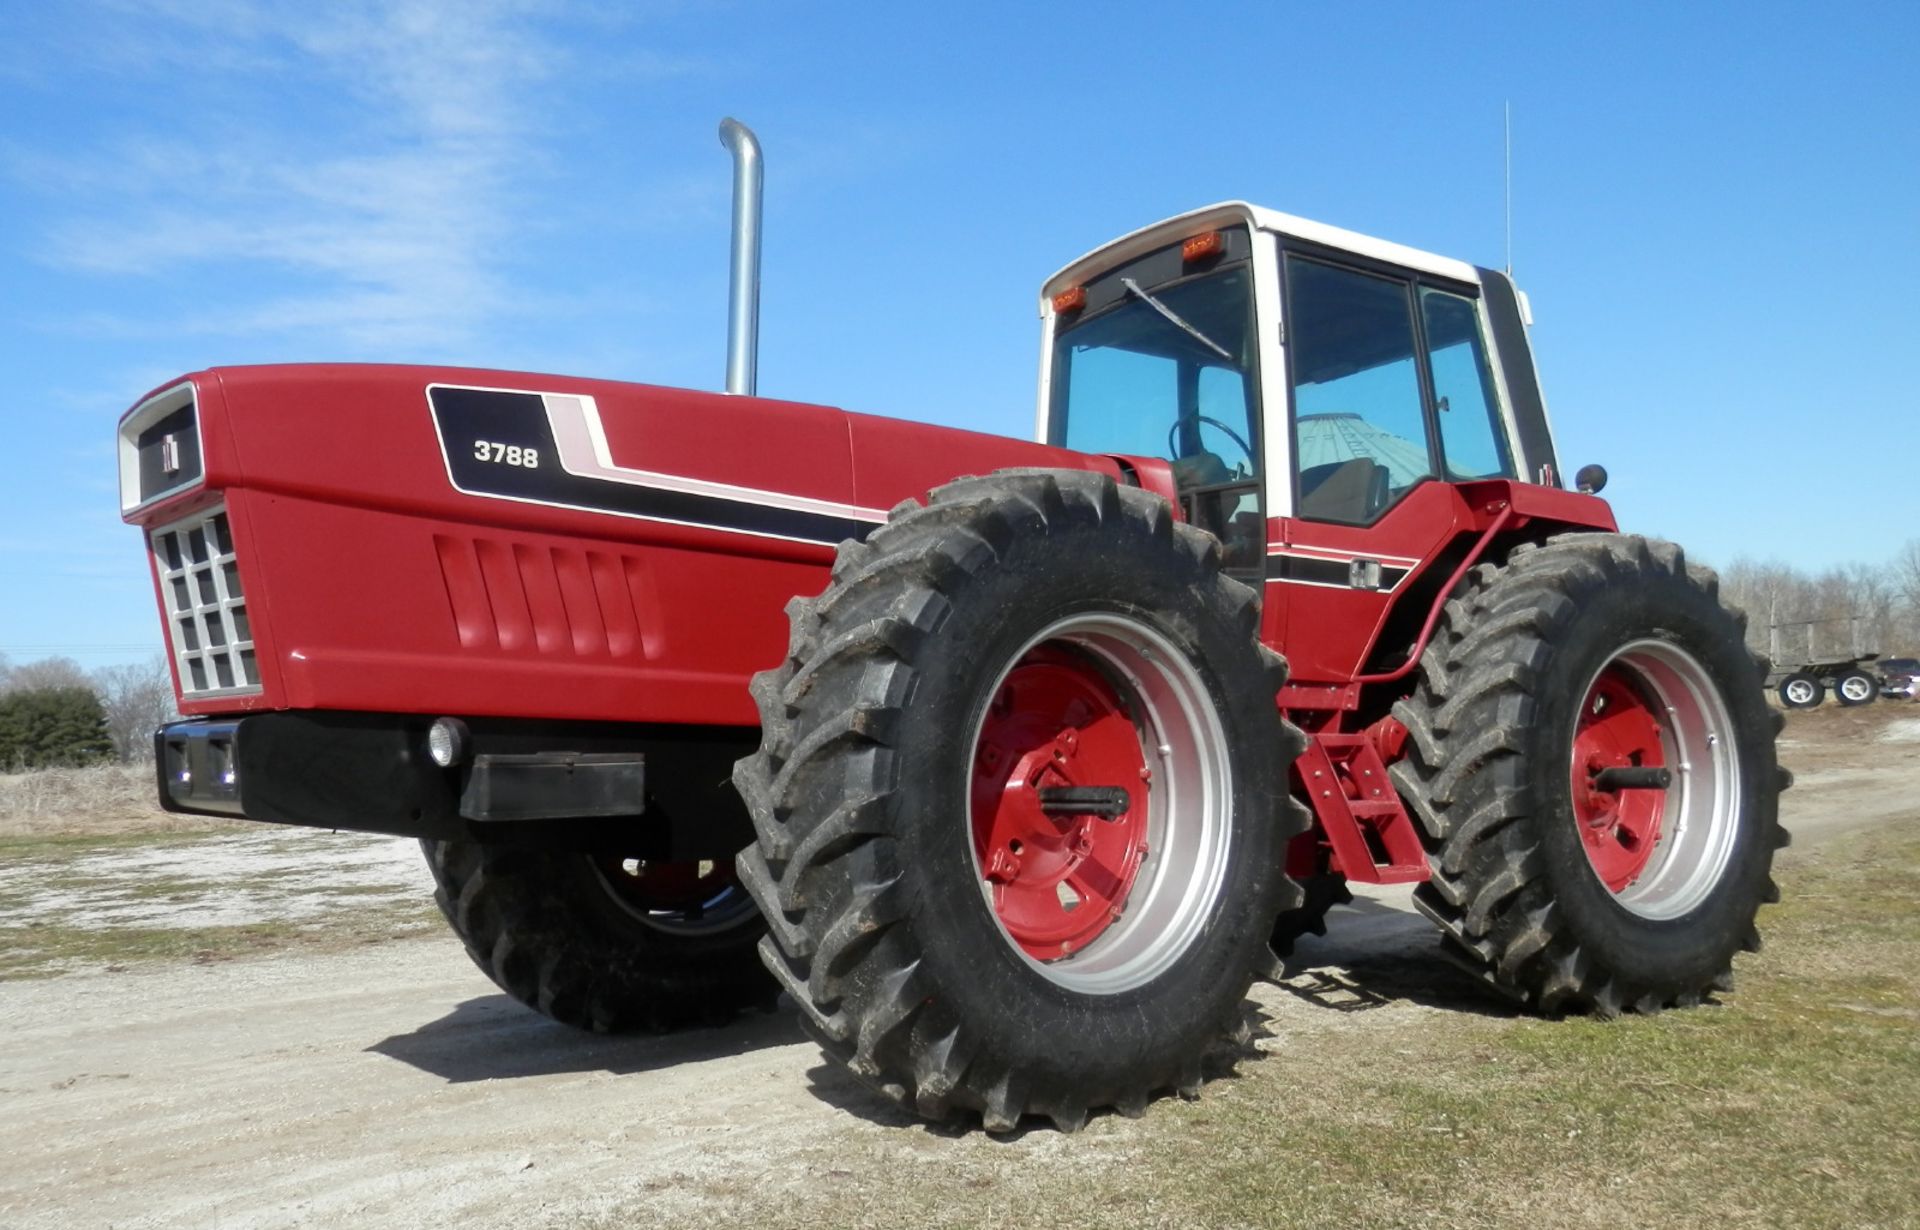 IH 3788 2+2 4x4 TRACTOR, SN 9088 - Image 2 of 21